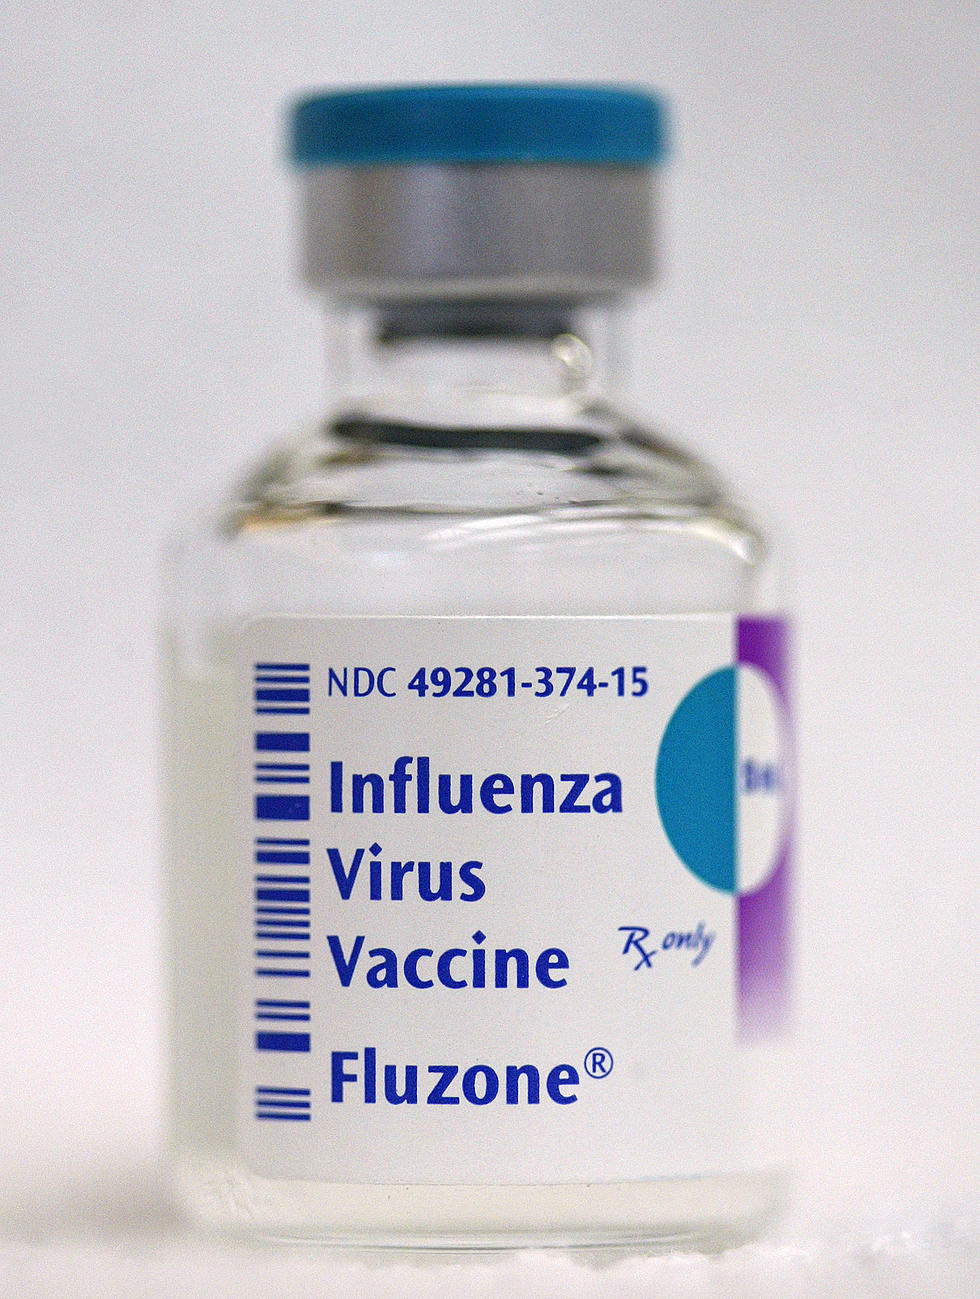 Flu Clinics in Liberty and Camp Point Tomorrow